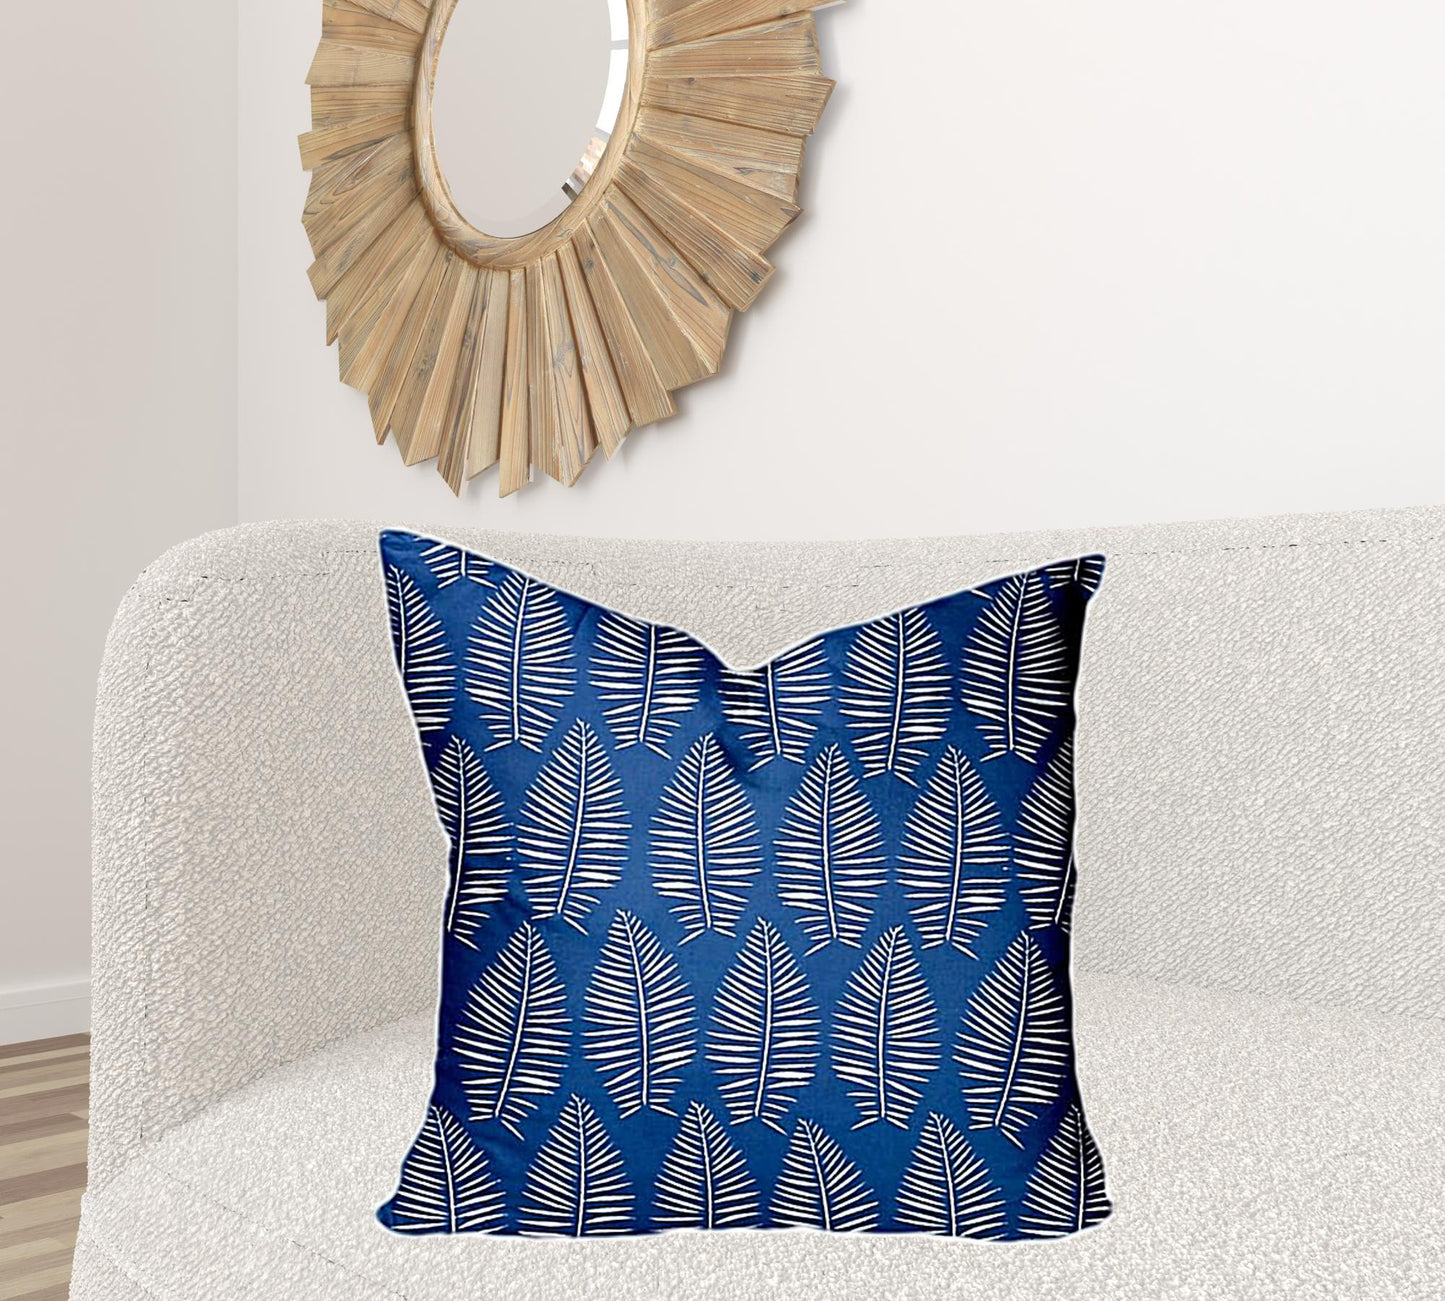 26" X 26" Blue And White Zippered Tropical Throw Indoor Outdoor Pillow